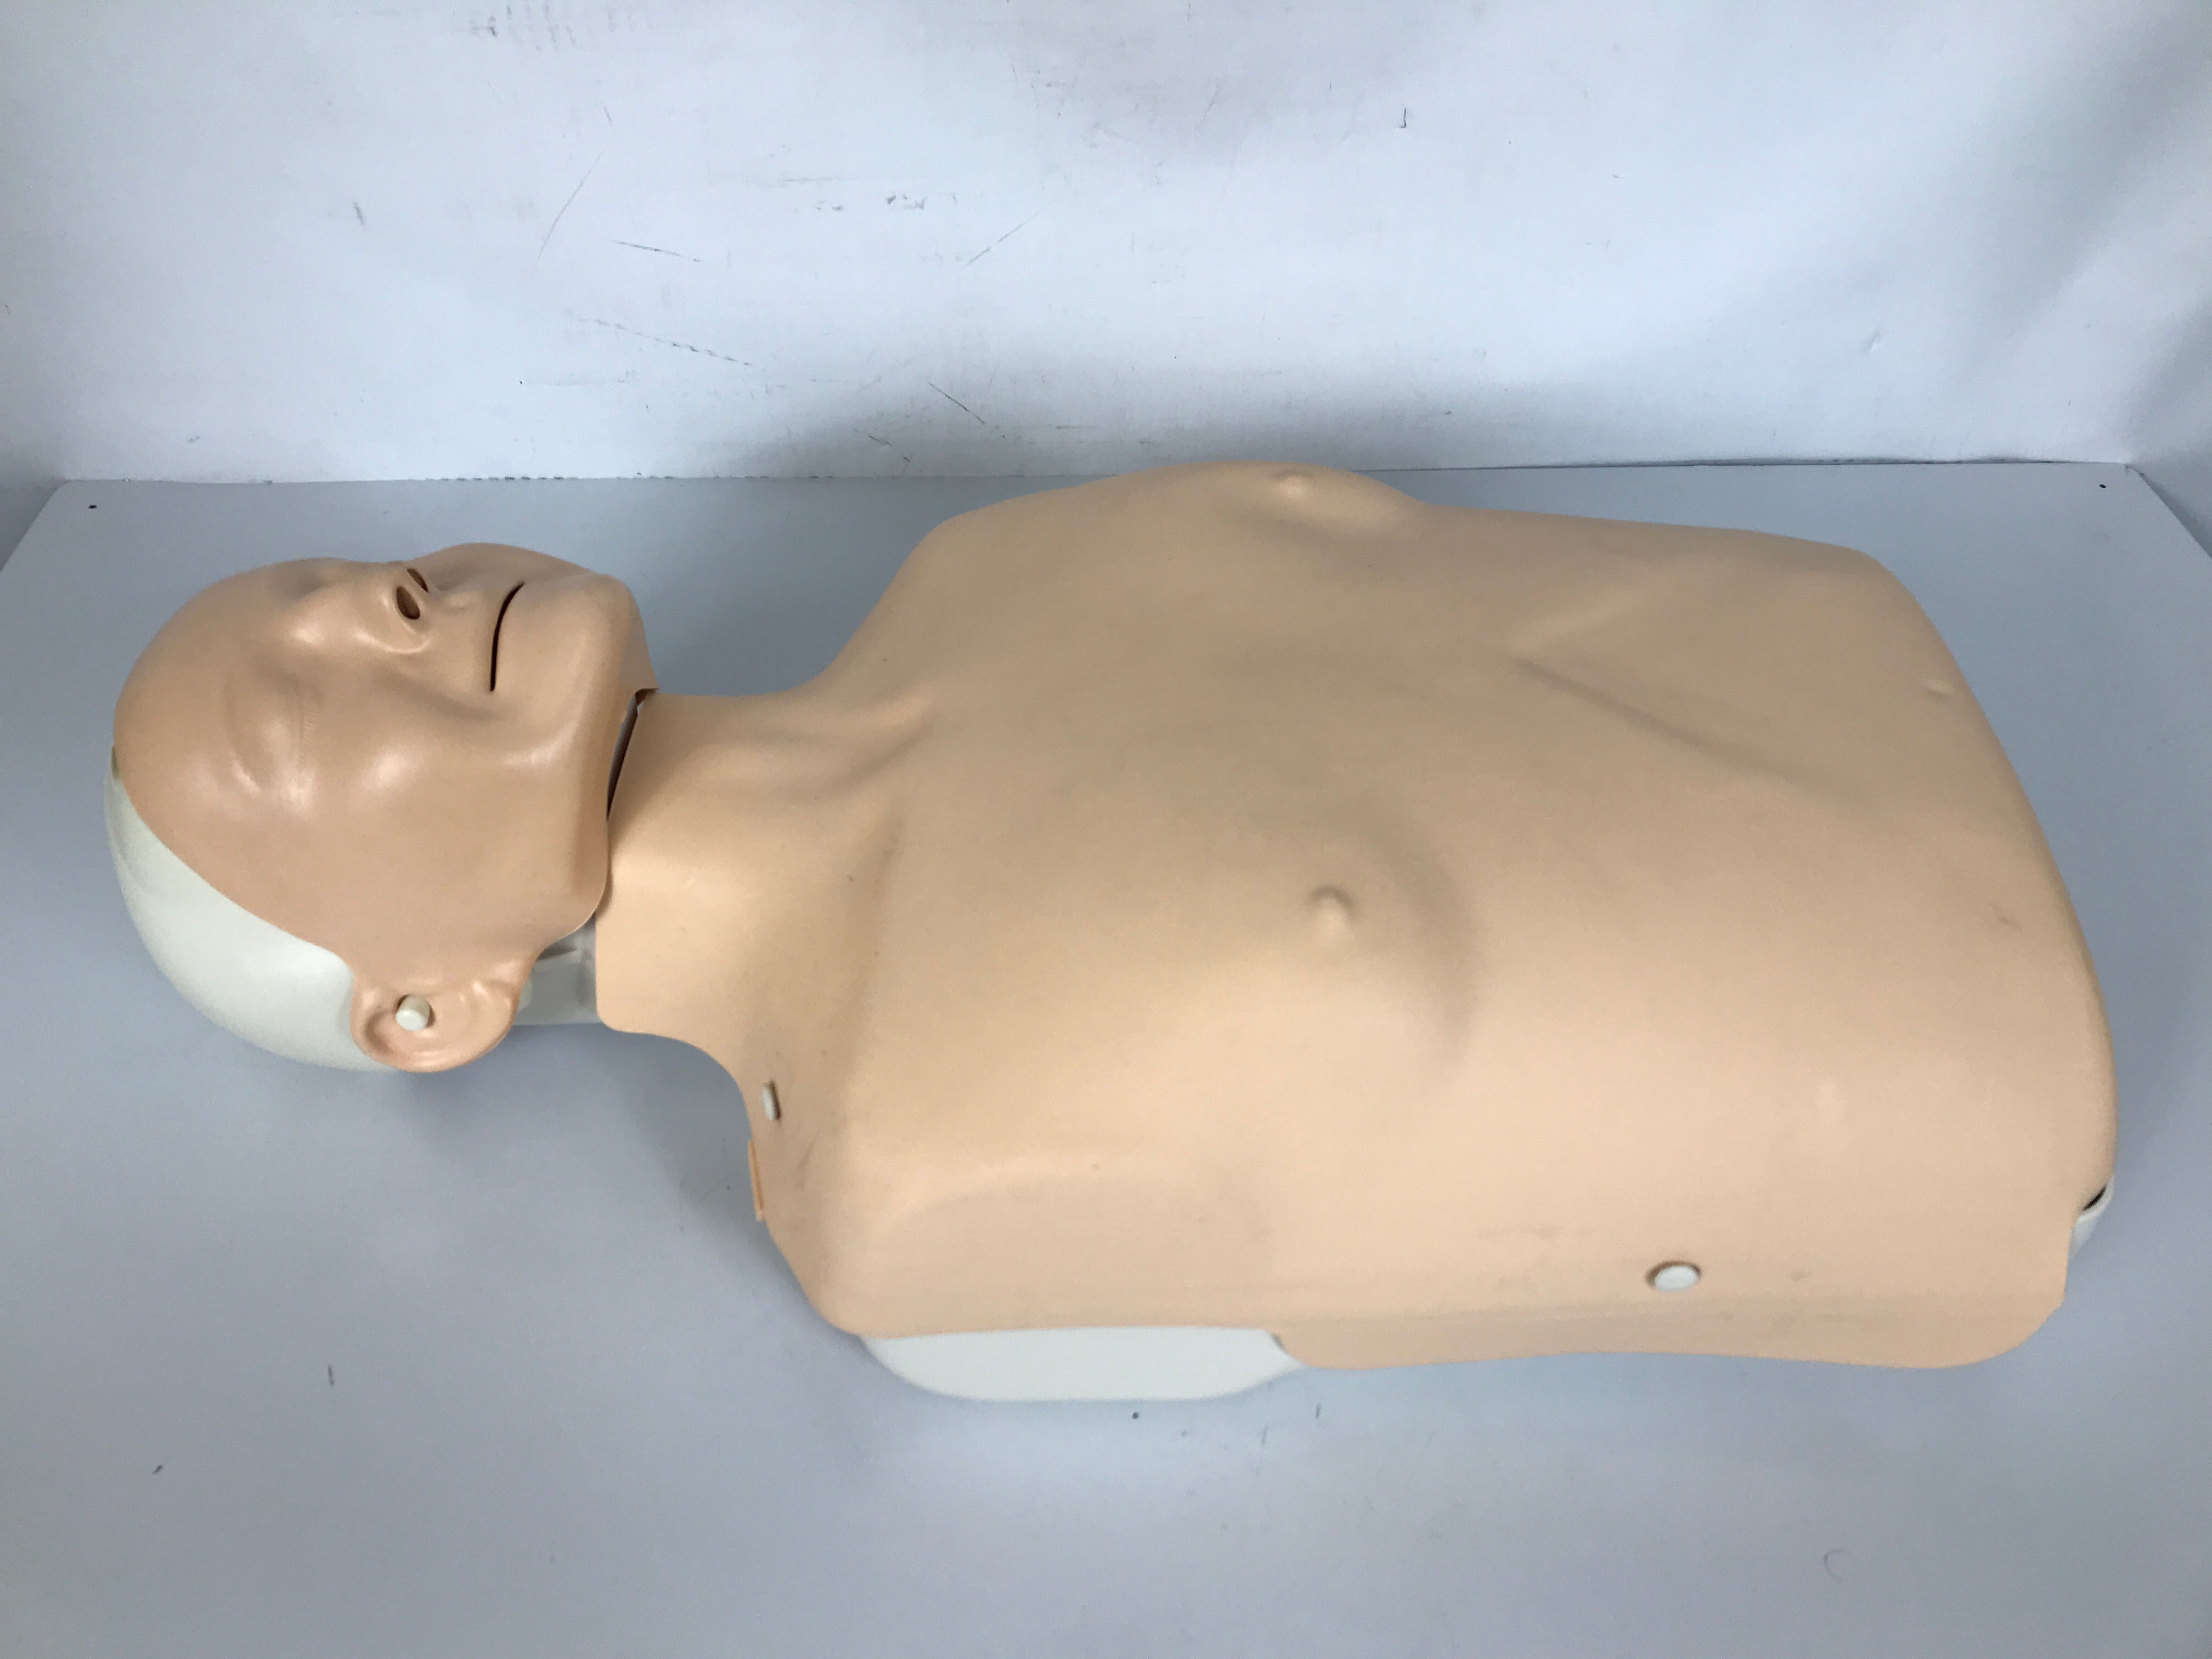 4 Laerdal Little Anne CPR Training Adult Torso Manikins with Bag and Extras #2